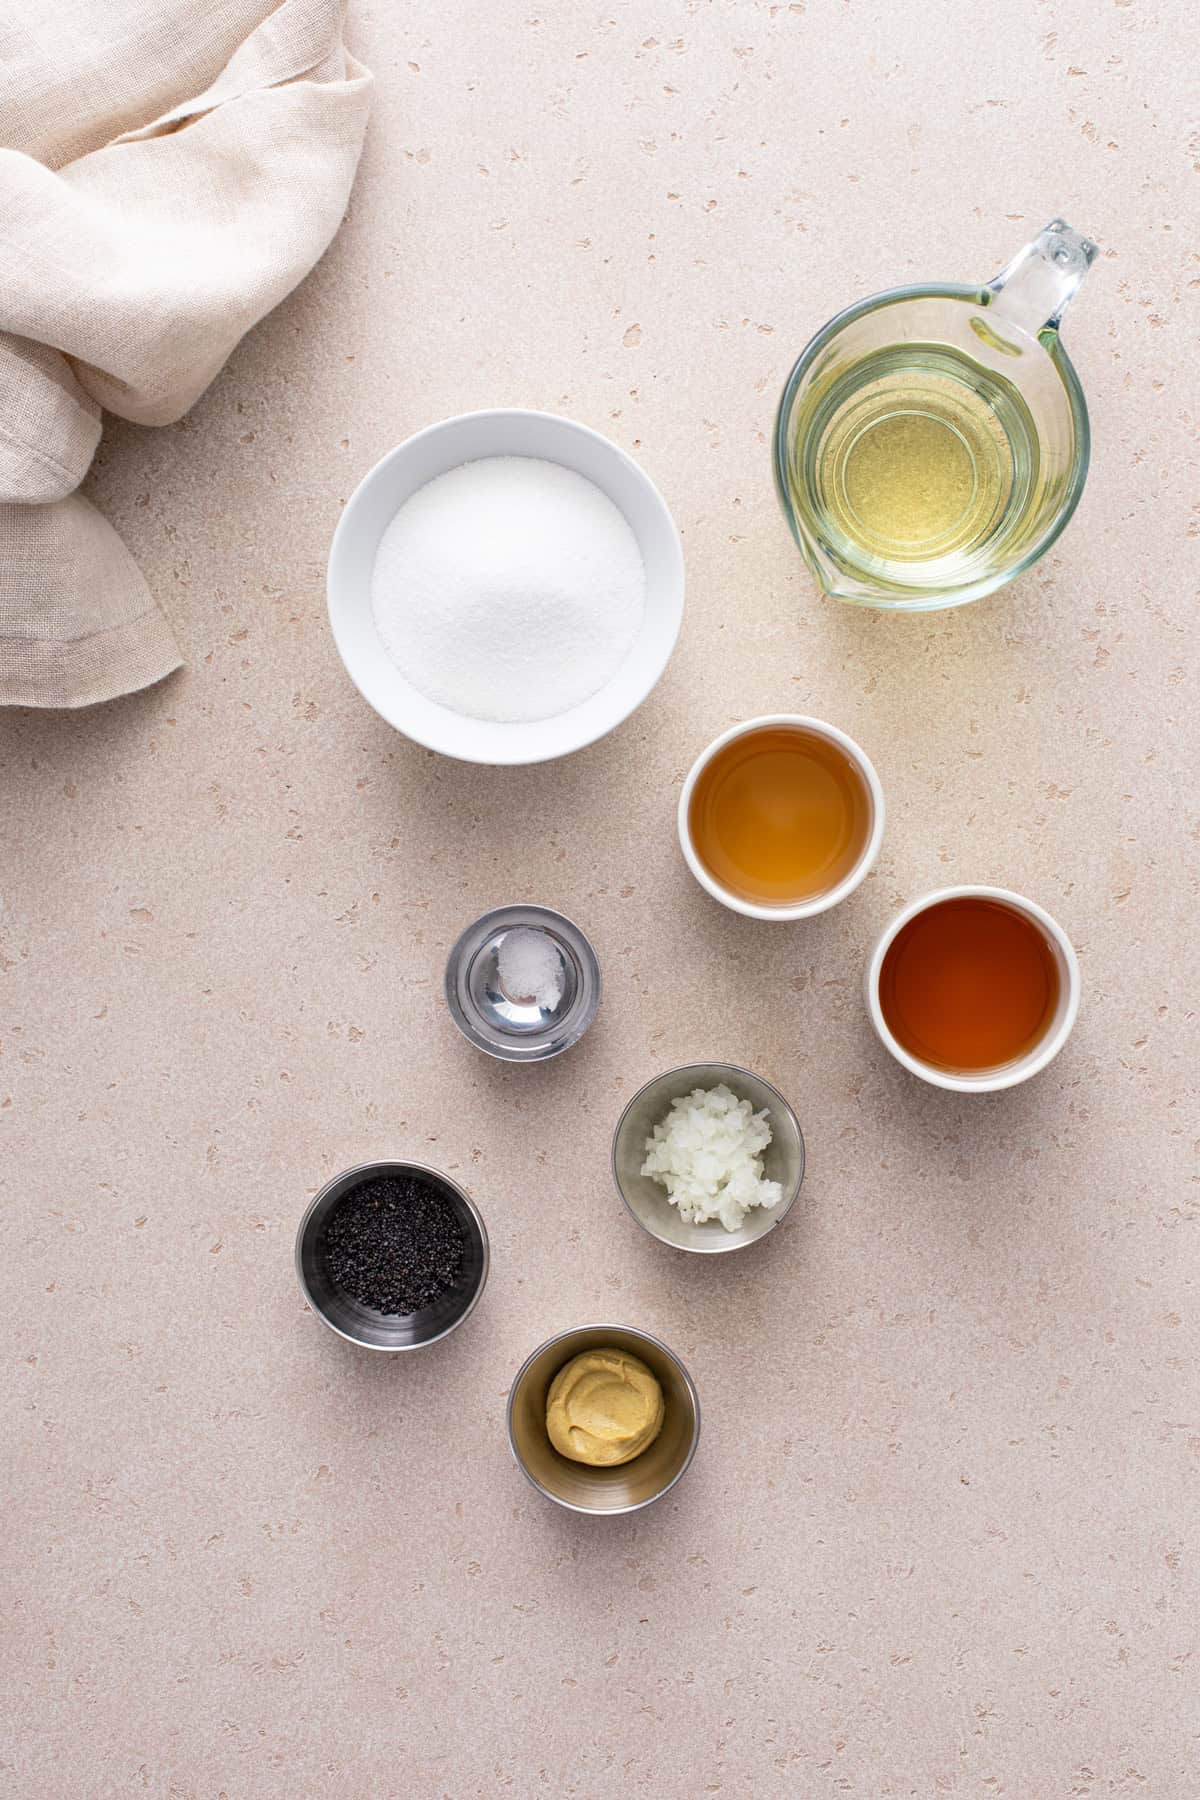 poppy seed dressing ingredients arranged on a countertop.